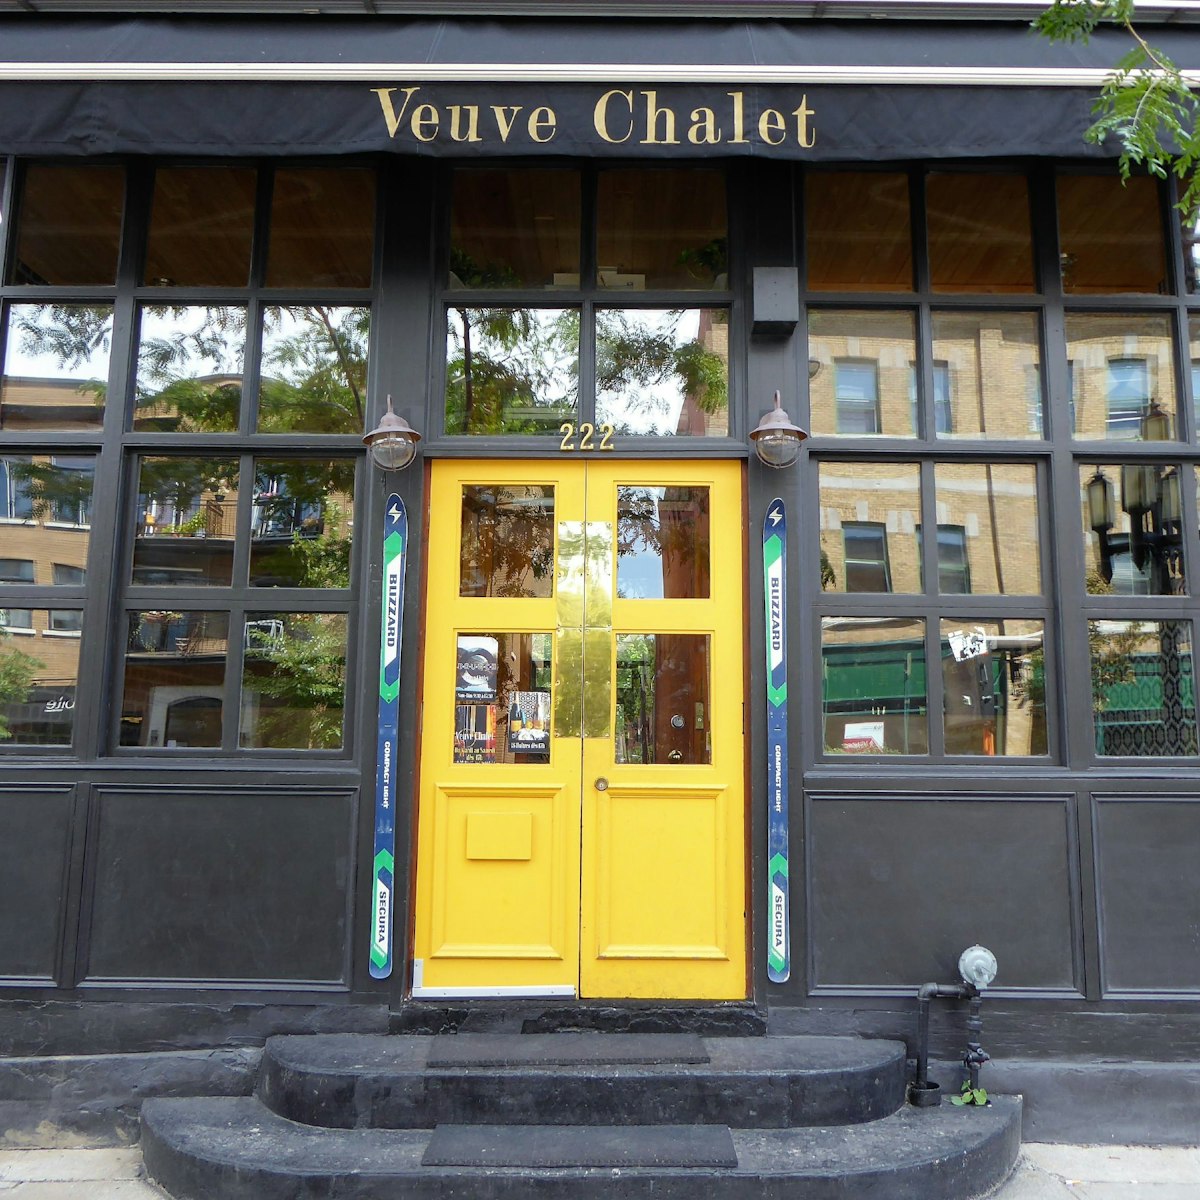 Veuve Chalet is a bistro located in the Plateau Mont-Royal.